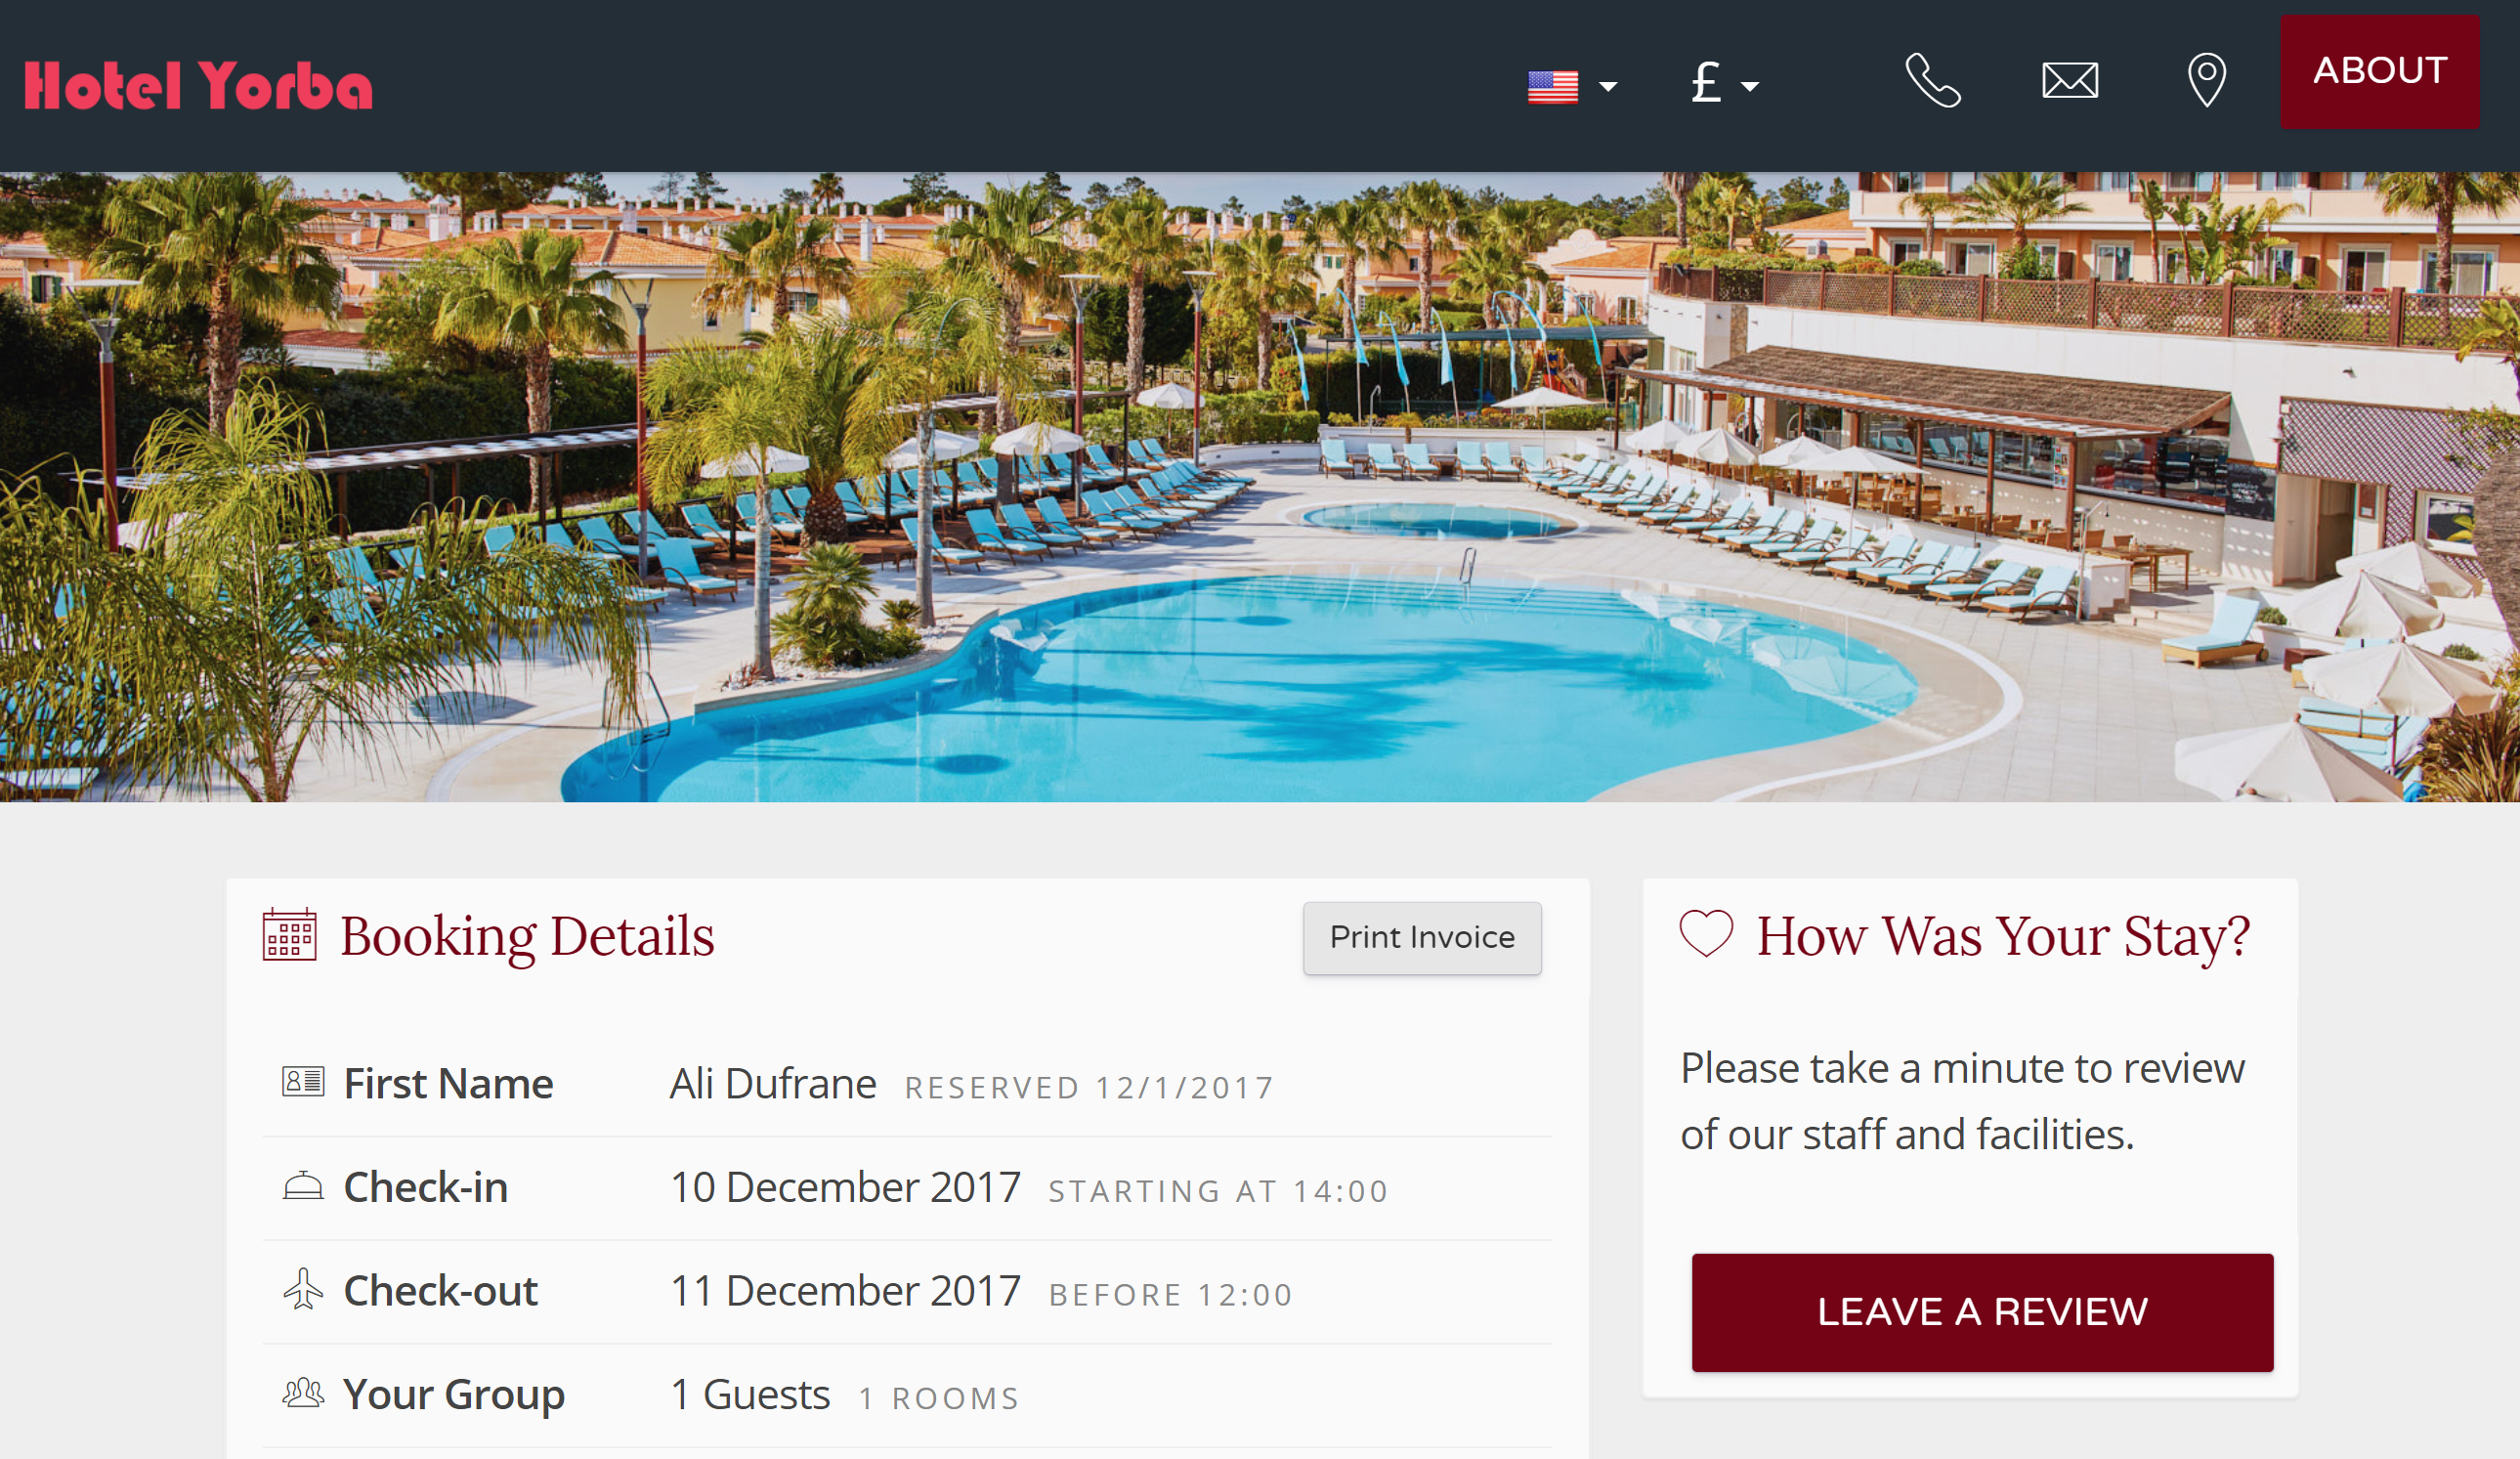 The invoice is also available to the guest after they have checked out. The guest will receive an email directing them to the guest portal section of your booking engine. From there, they can leave a review if you have enabled your review engine, or just print their invoice.